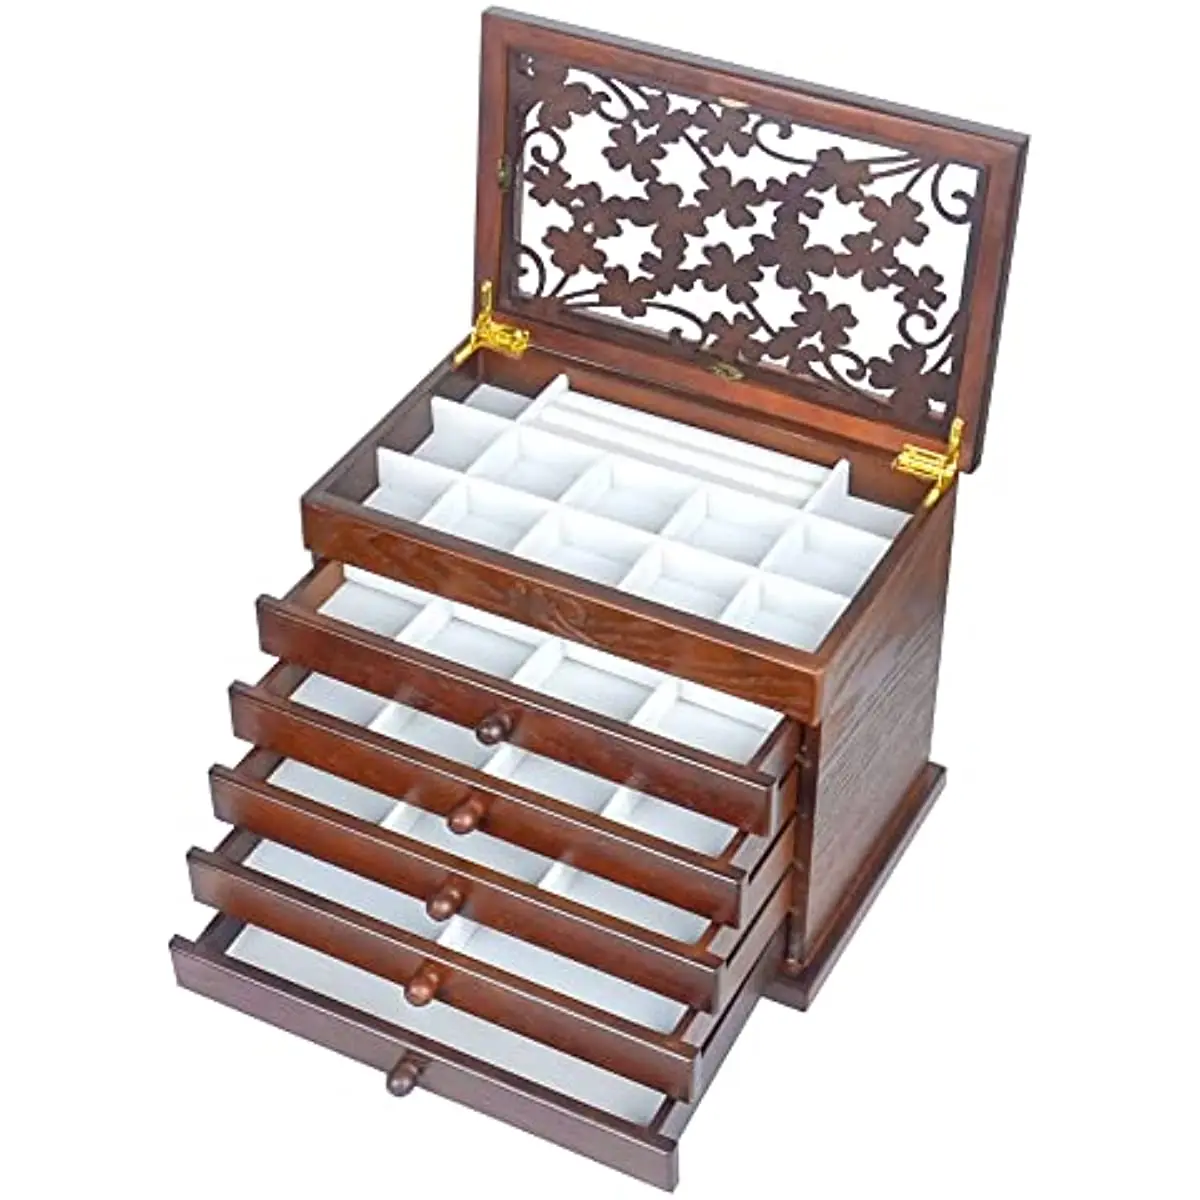 Kendal 6 Layer with 5 Drawers Jewelry Box for Women, Real Wooden Jewelry Organizer Box with Rose Leaf Patterns, Jewelry Boxes